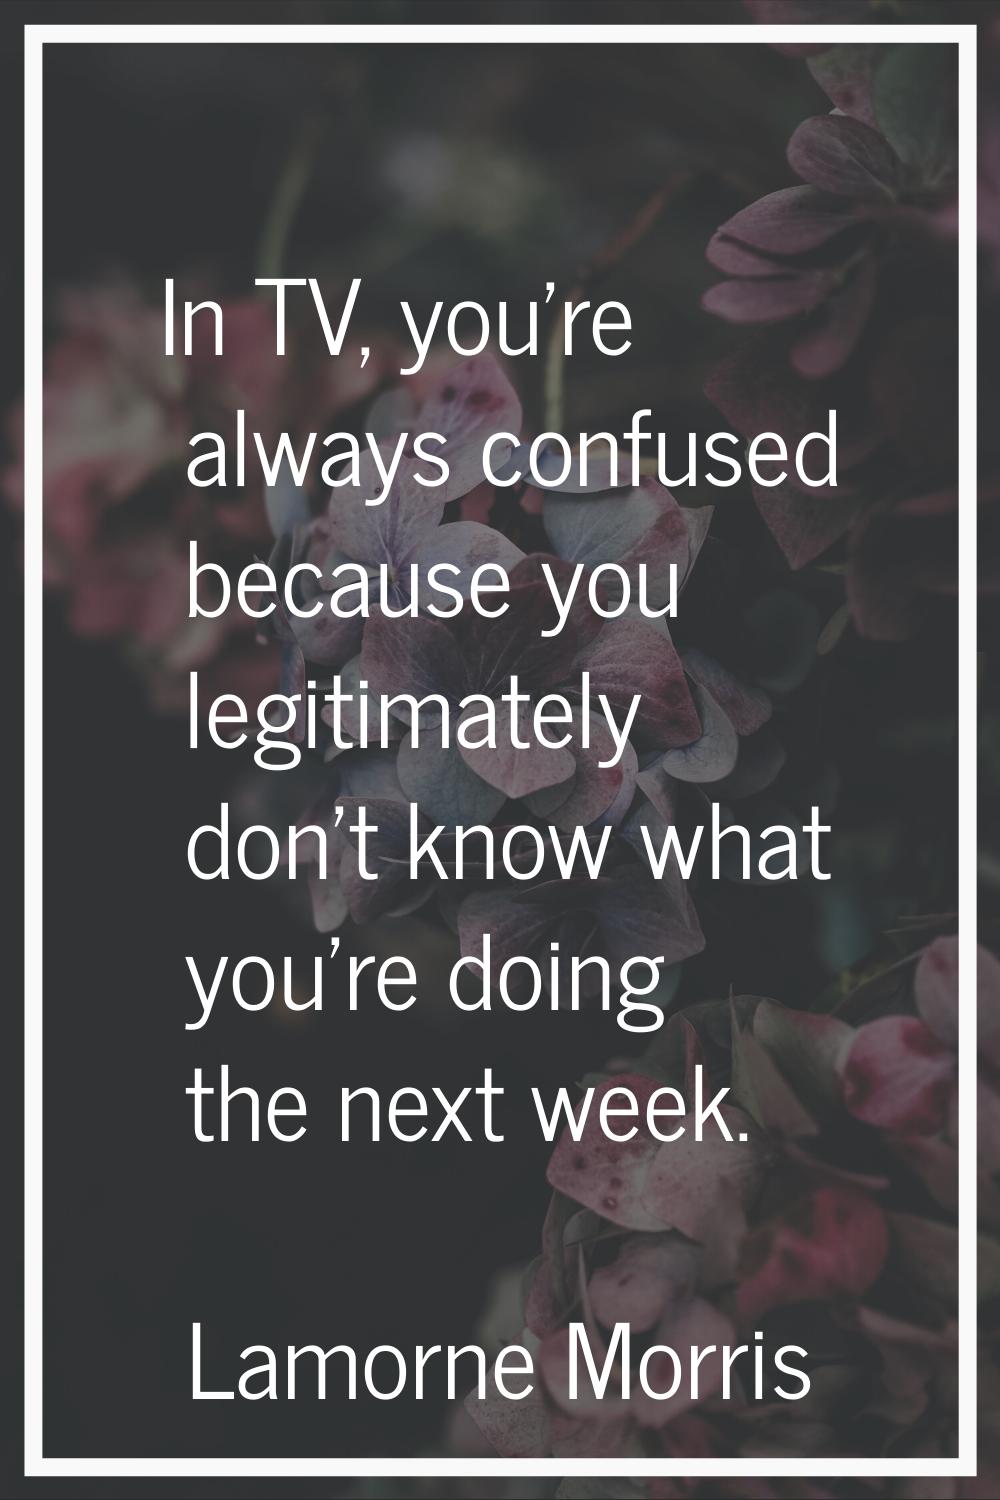 In TV, you're always confused because you legitimately don't know what you're doing the next week.